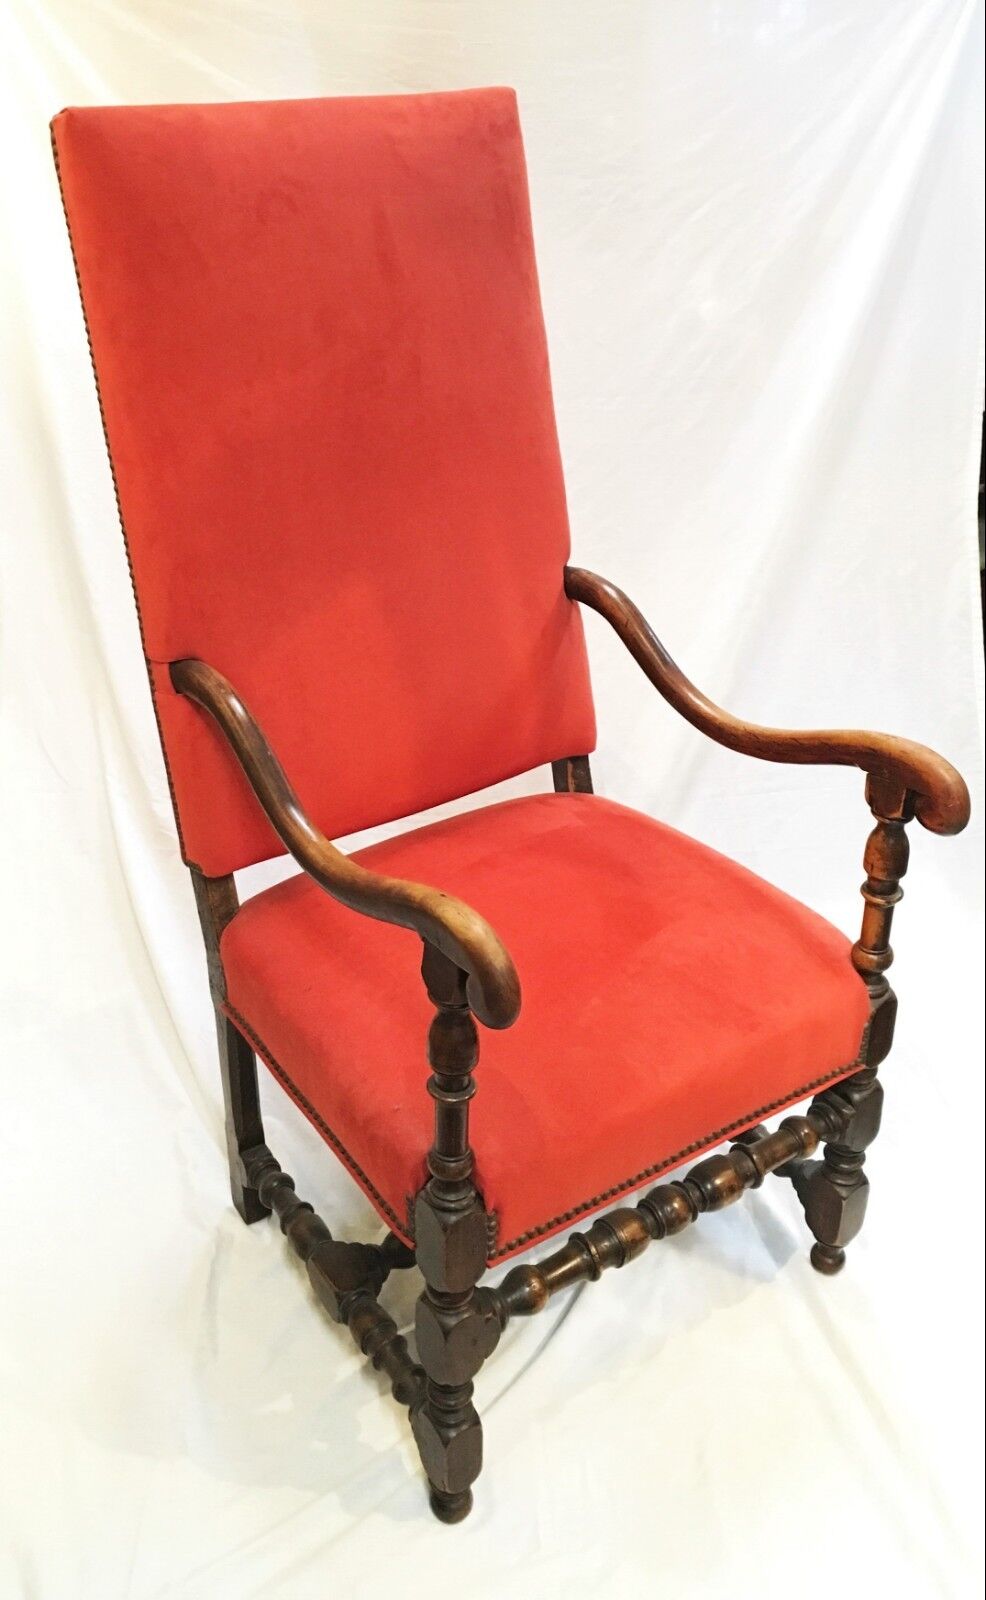 17th c. Period Continental, Flemish Walnut Upholstered Armchair